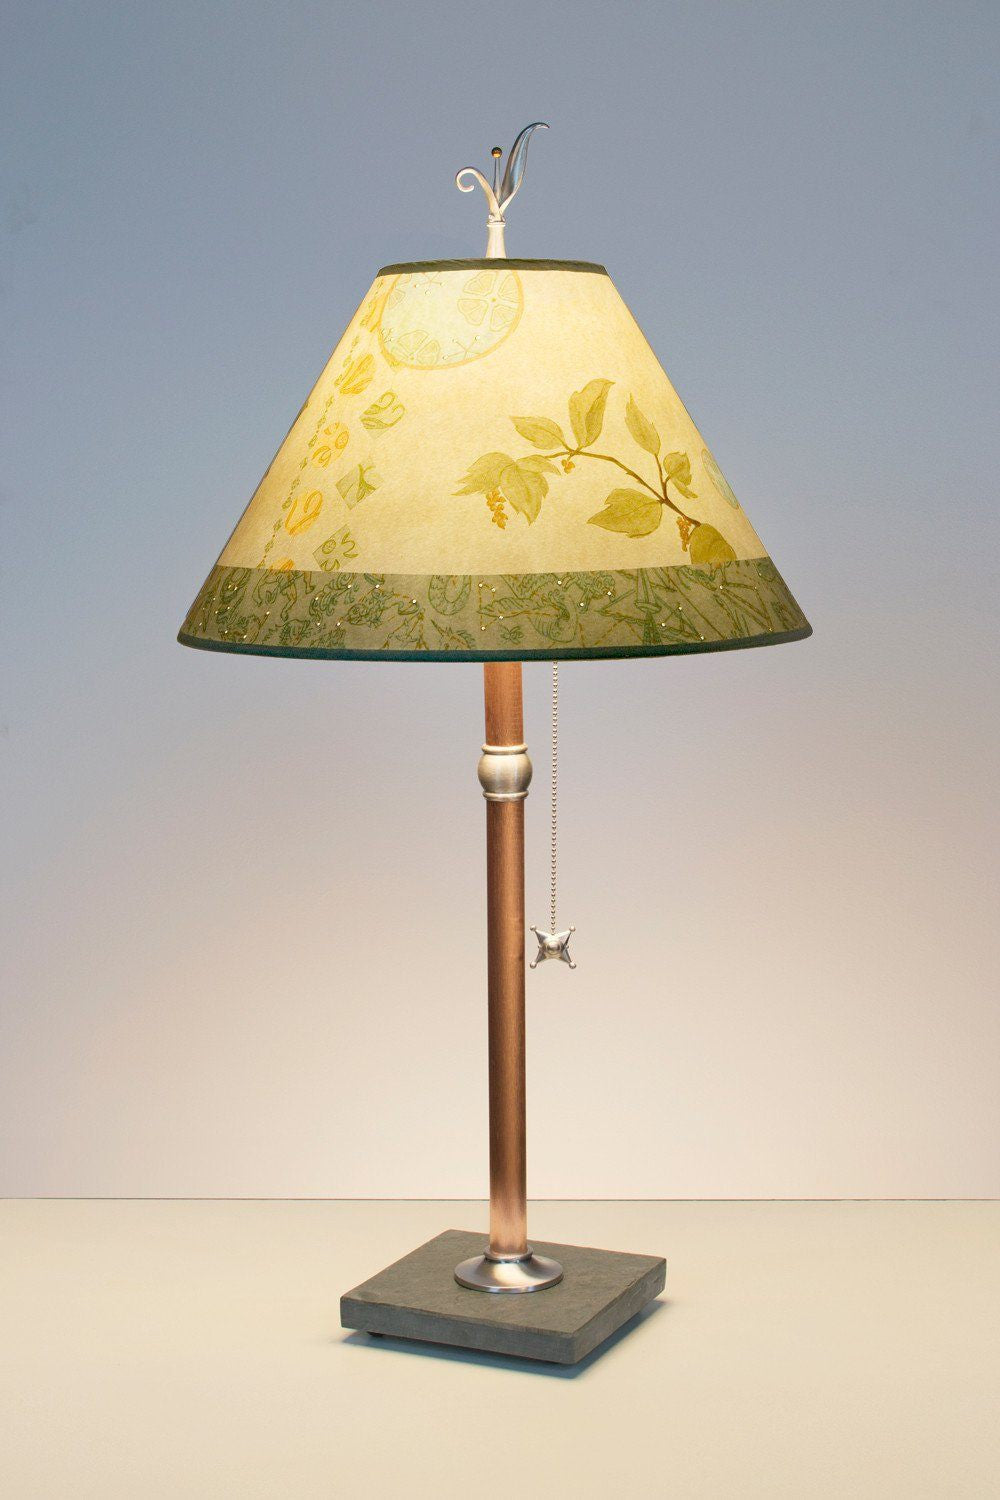 Janna Ugone & Co Table Lamps Copper Table Lamp with Medium Conical Shade in Celestial Leaf